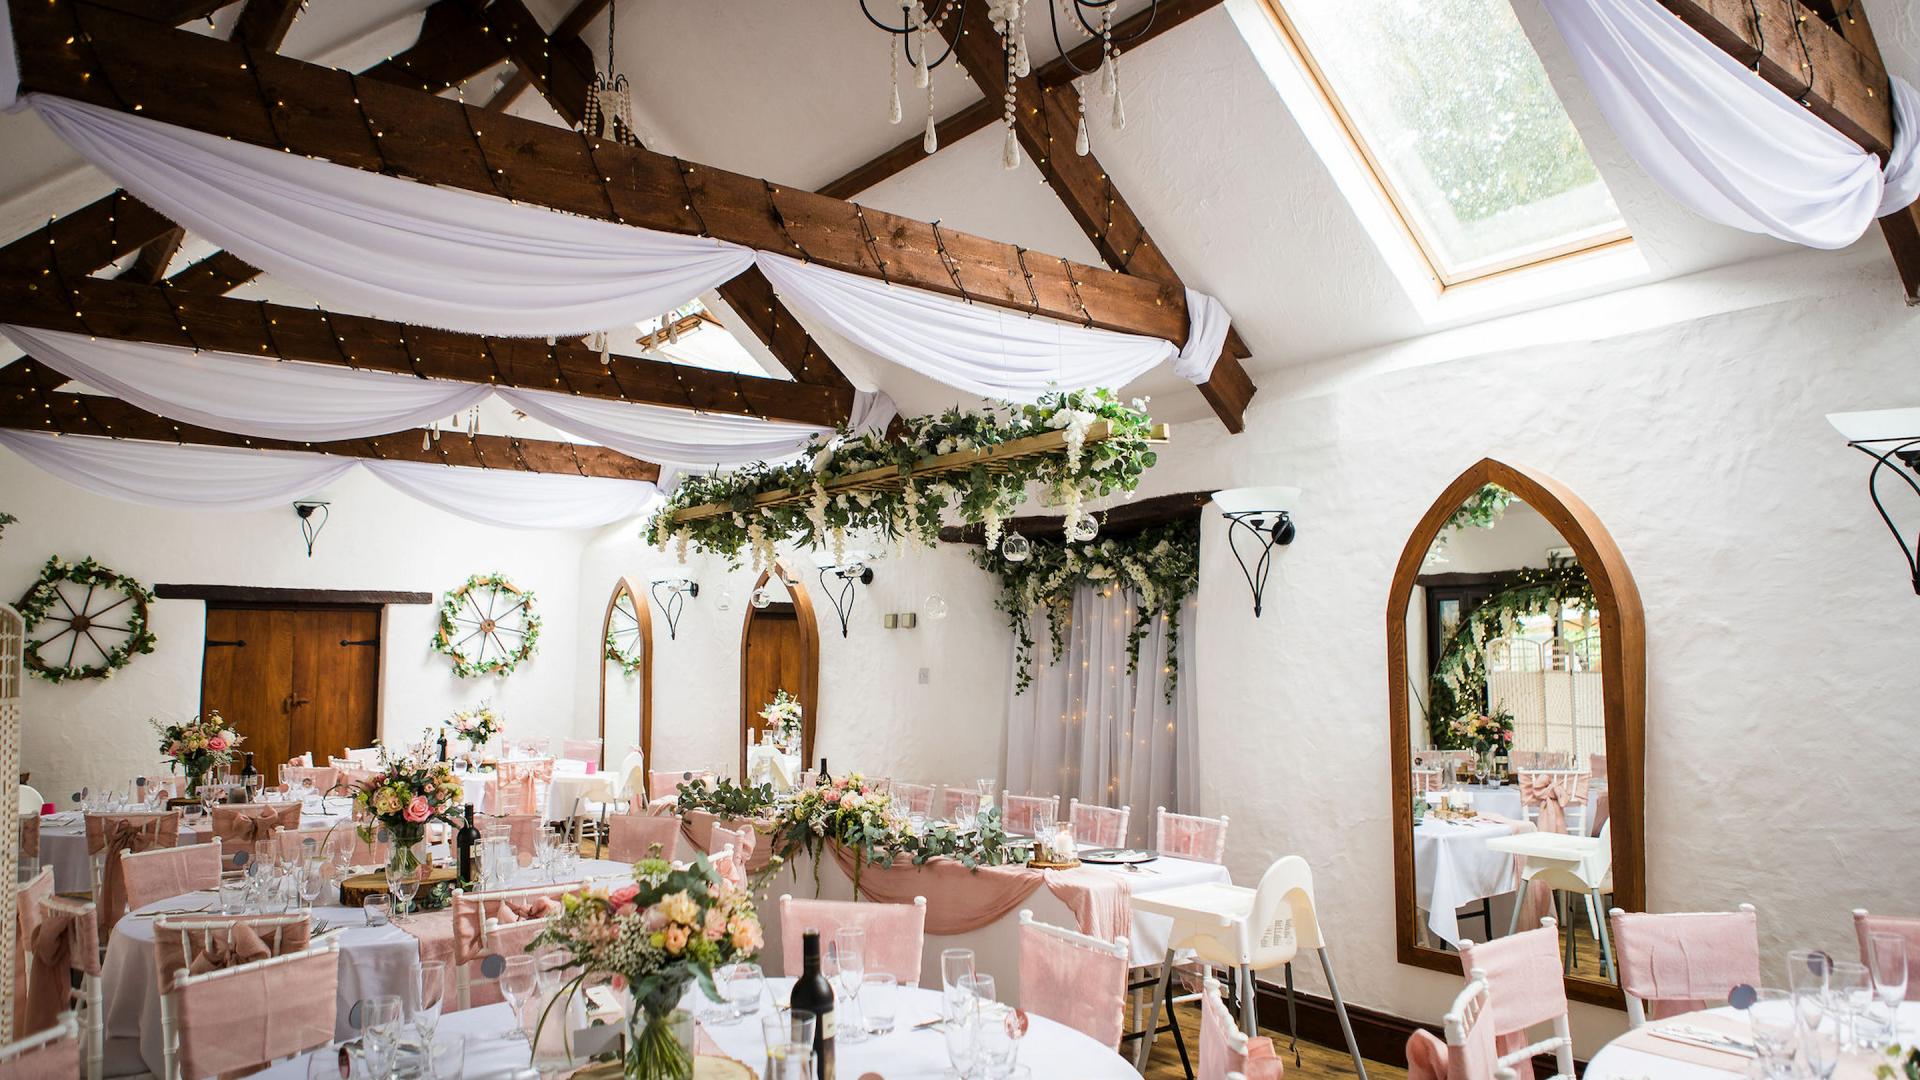 Affordable Wedding Venues for Hire in Devon